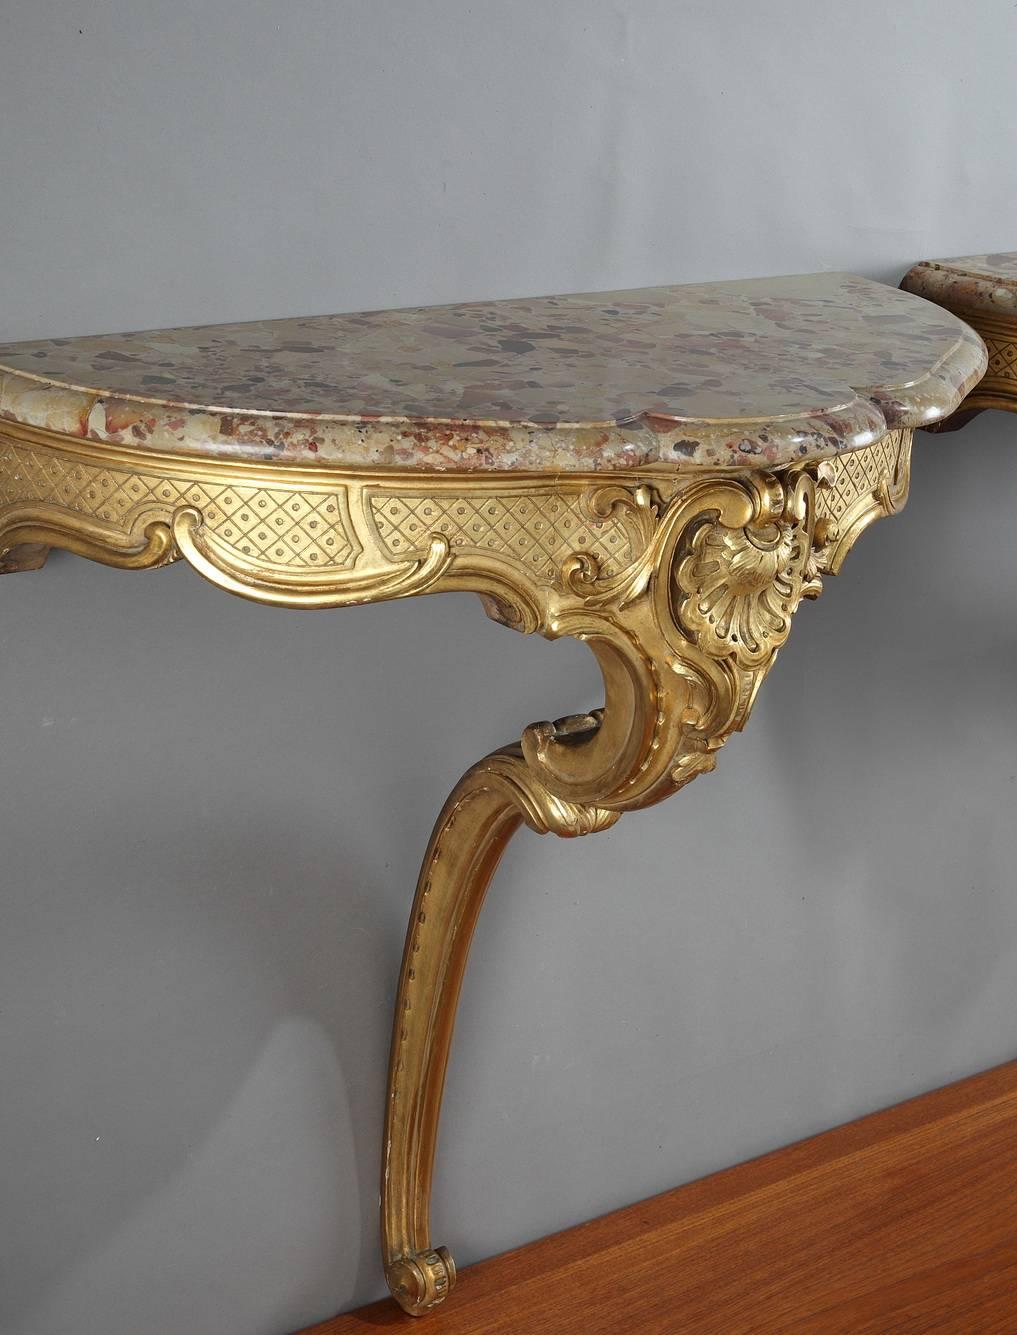 Pair of rounded console tables in giltwood in Louis XV style. They feature sculpted palmettes, foliated scrollwork and a latticework pattern. They are topped with Breche marble from Alep. The two tables are numbered 